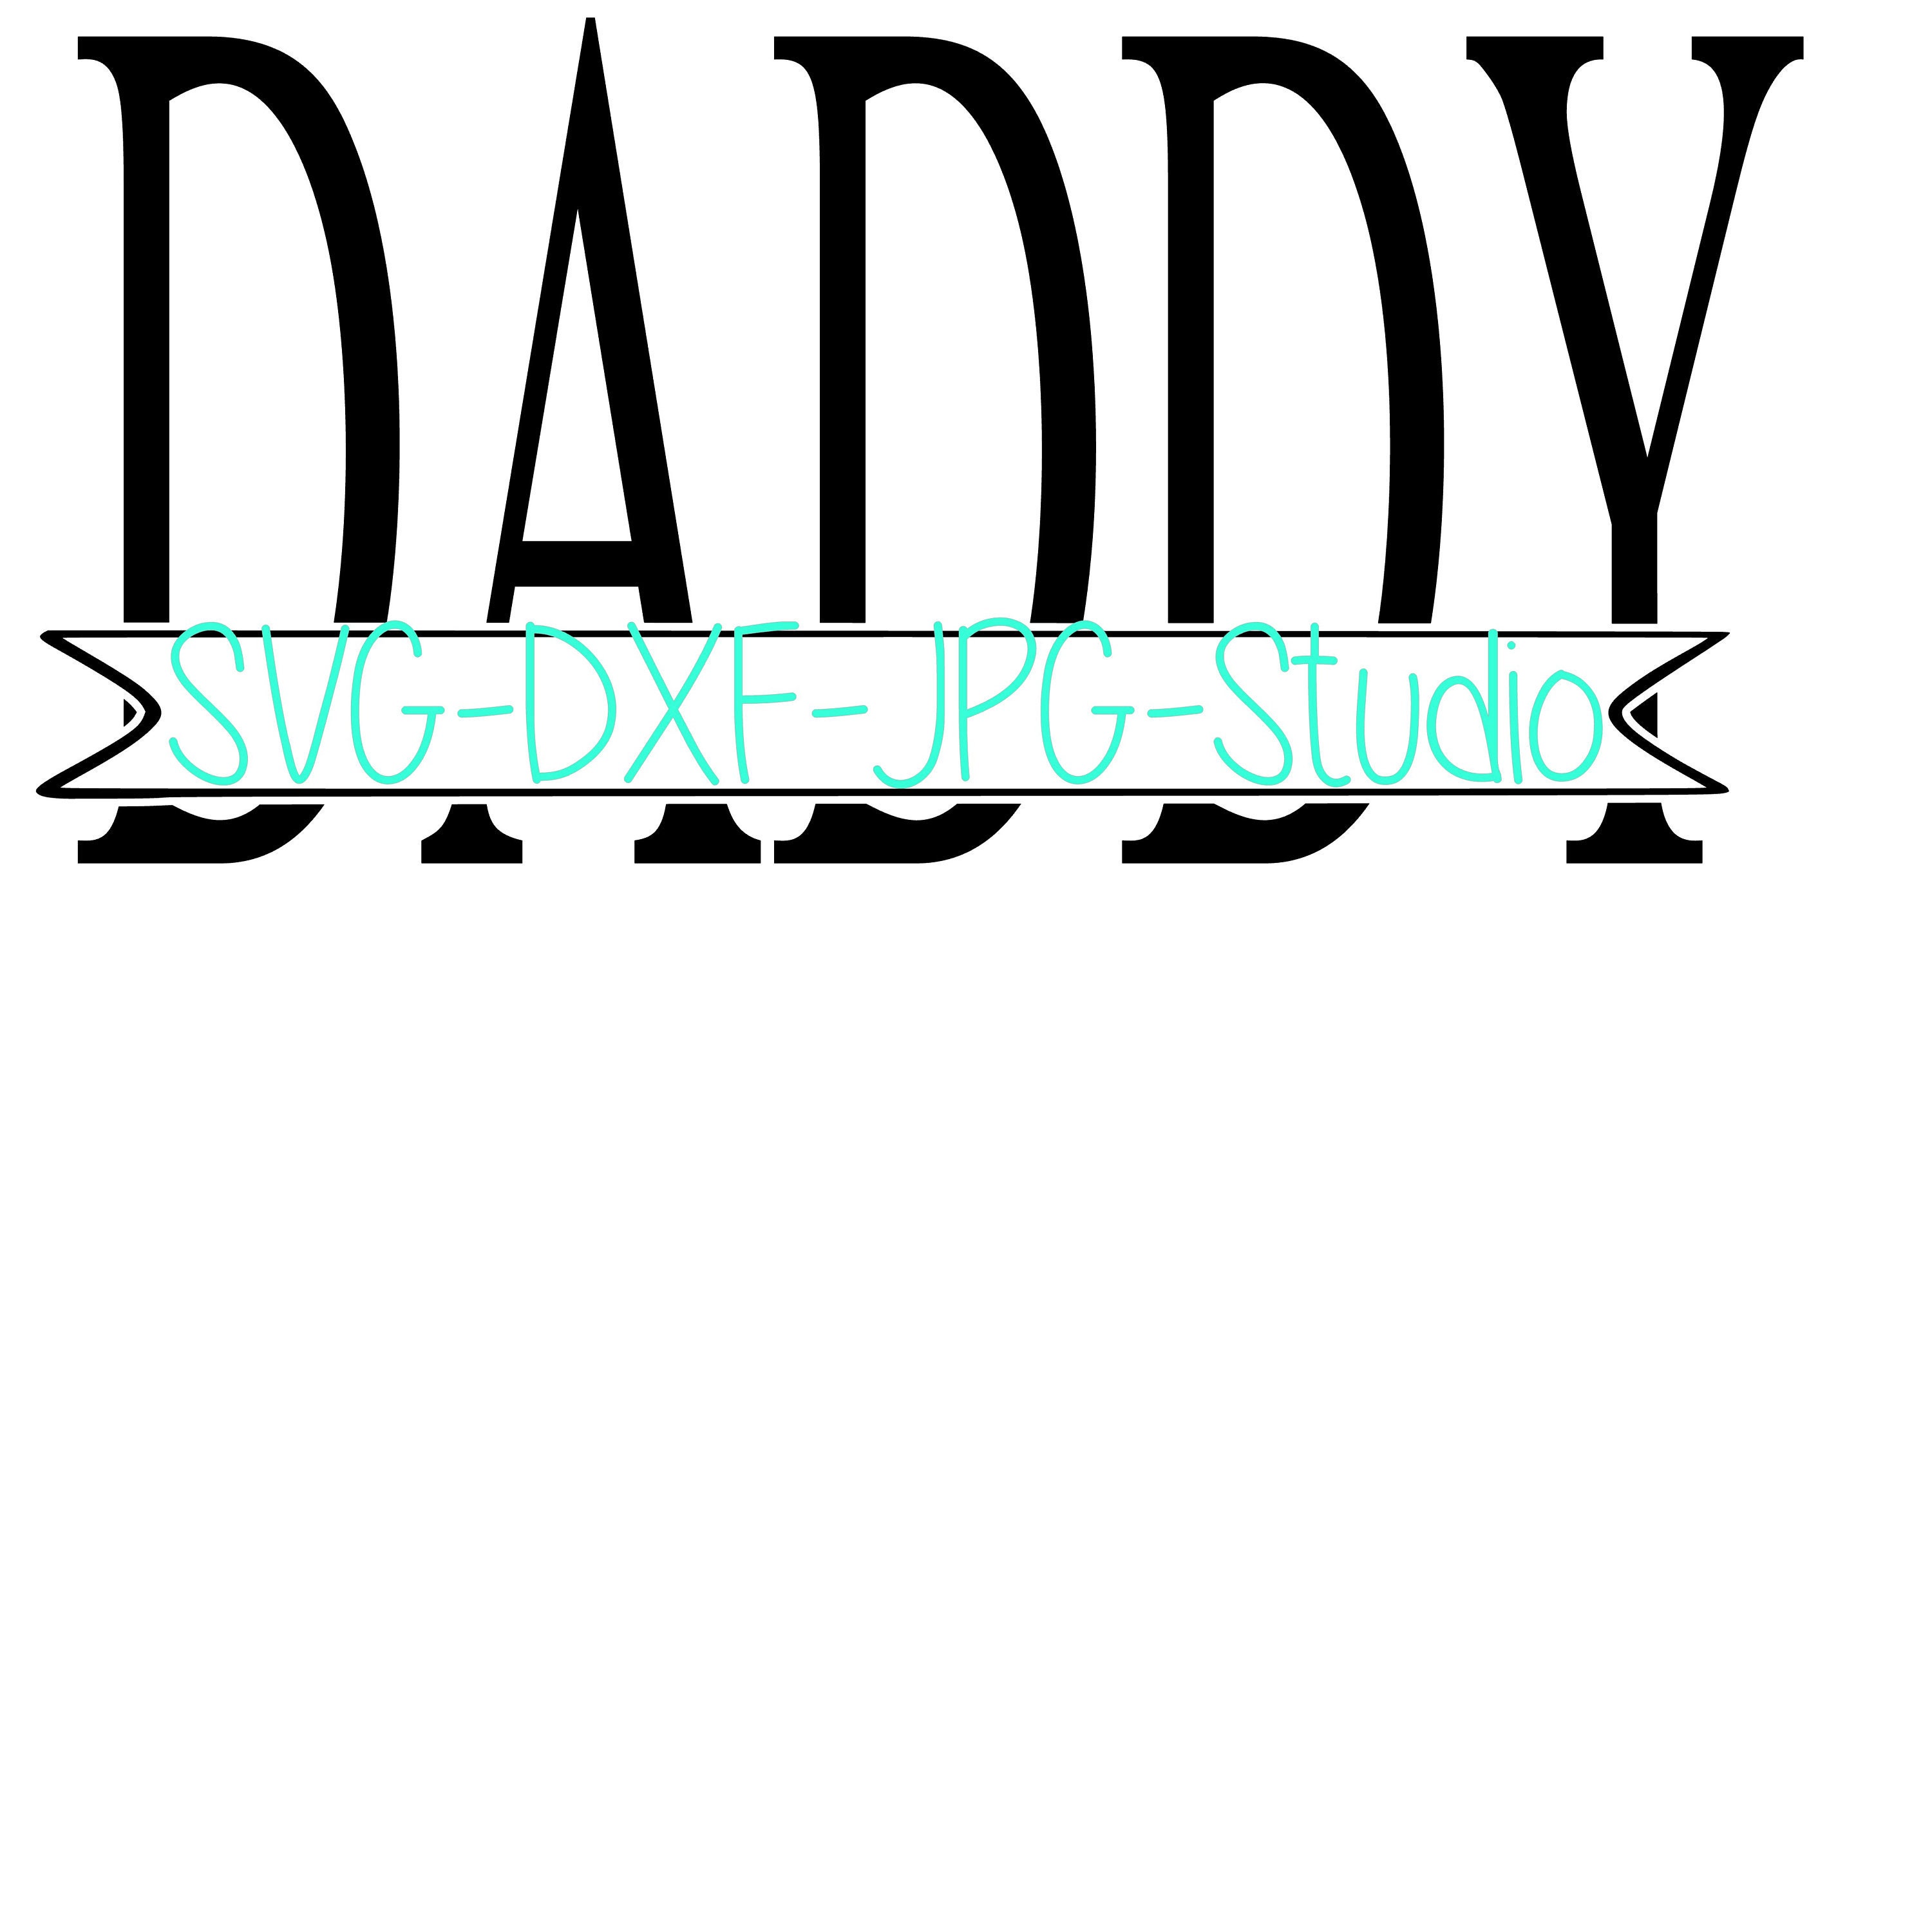 Fathers Day Daddy Blank Banner File SVG-DXF-JPG | Etsy